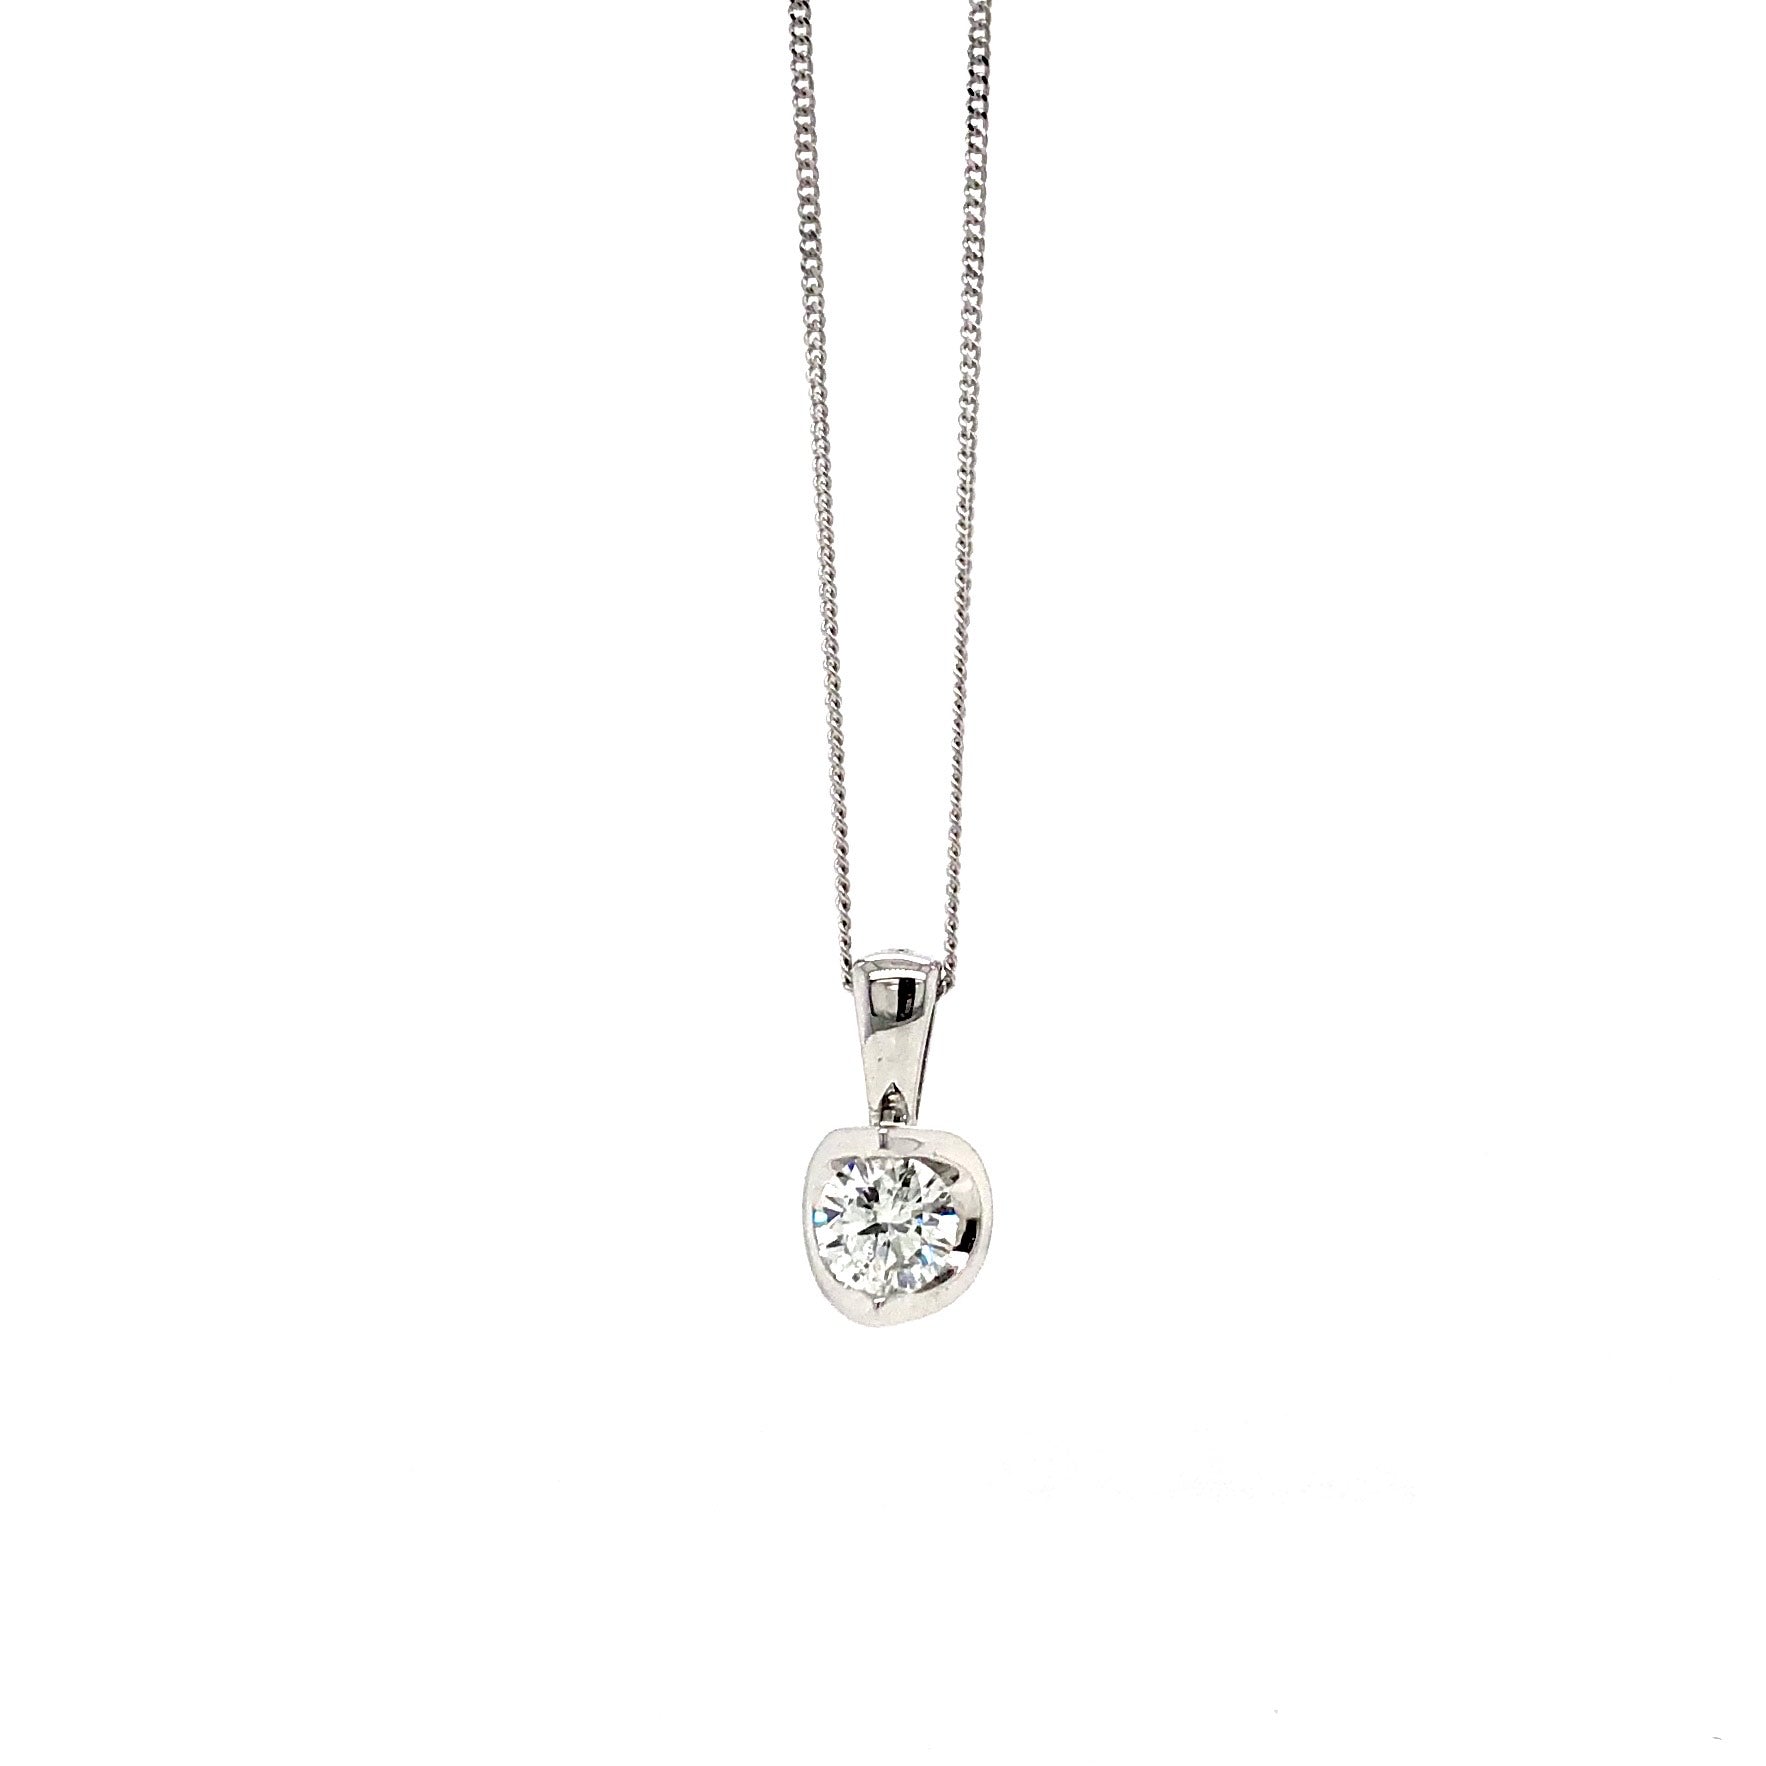 14KW Solitaire Diamond Pendant 0.25ct (Chain Included)